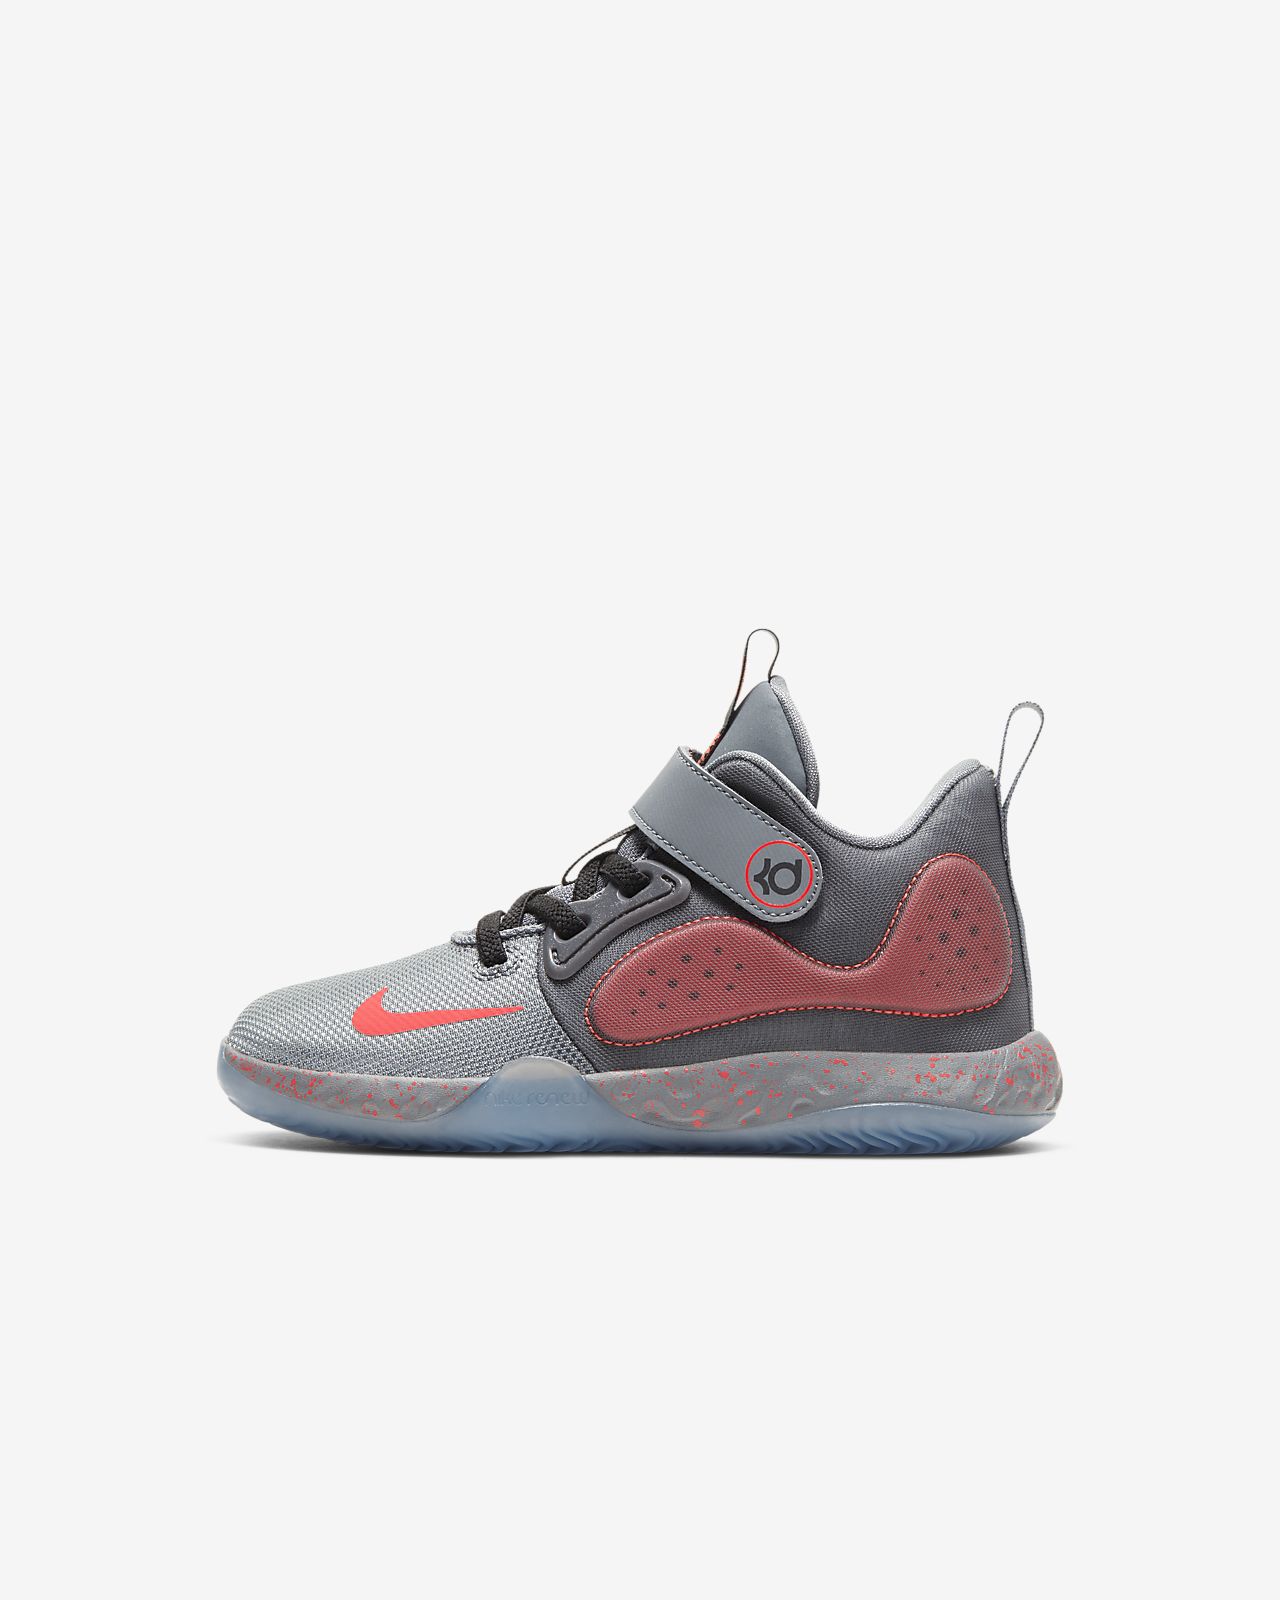 men's kd trey 5 vi basketball sneakers from finish line